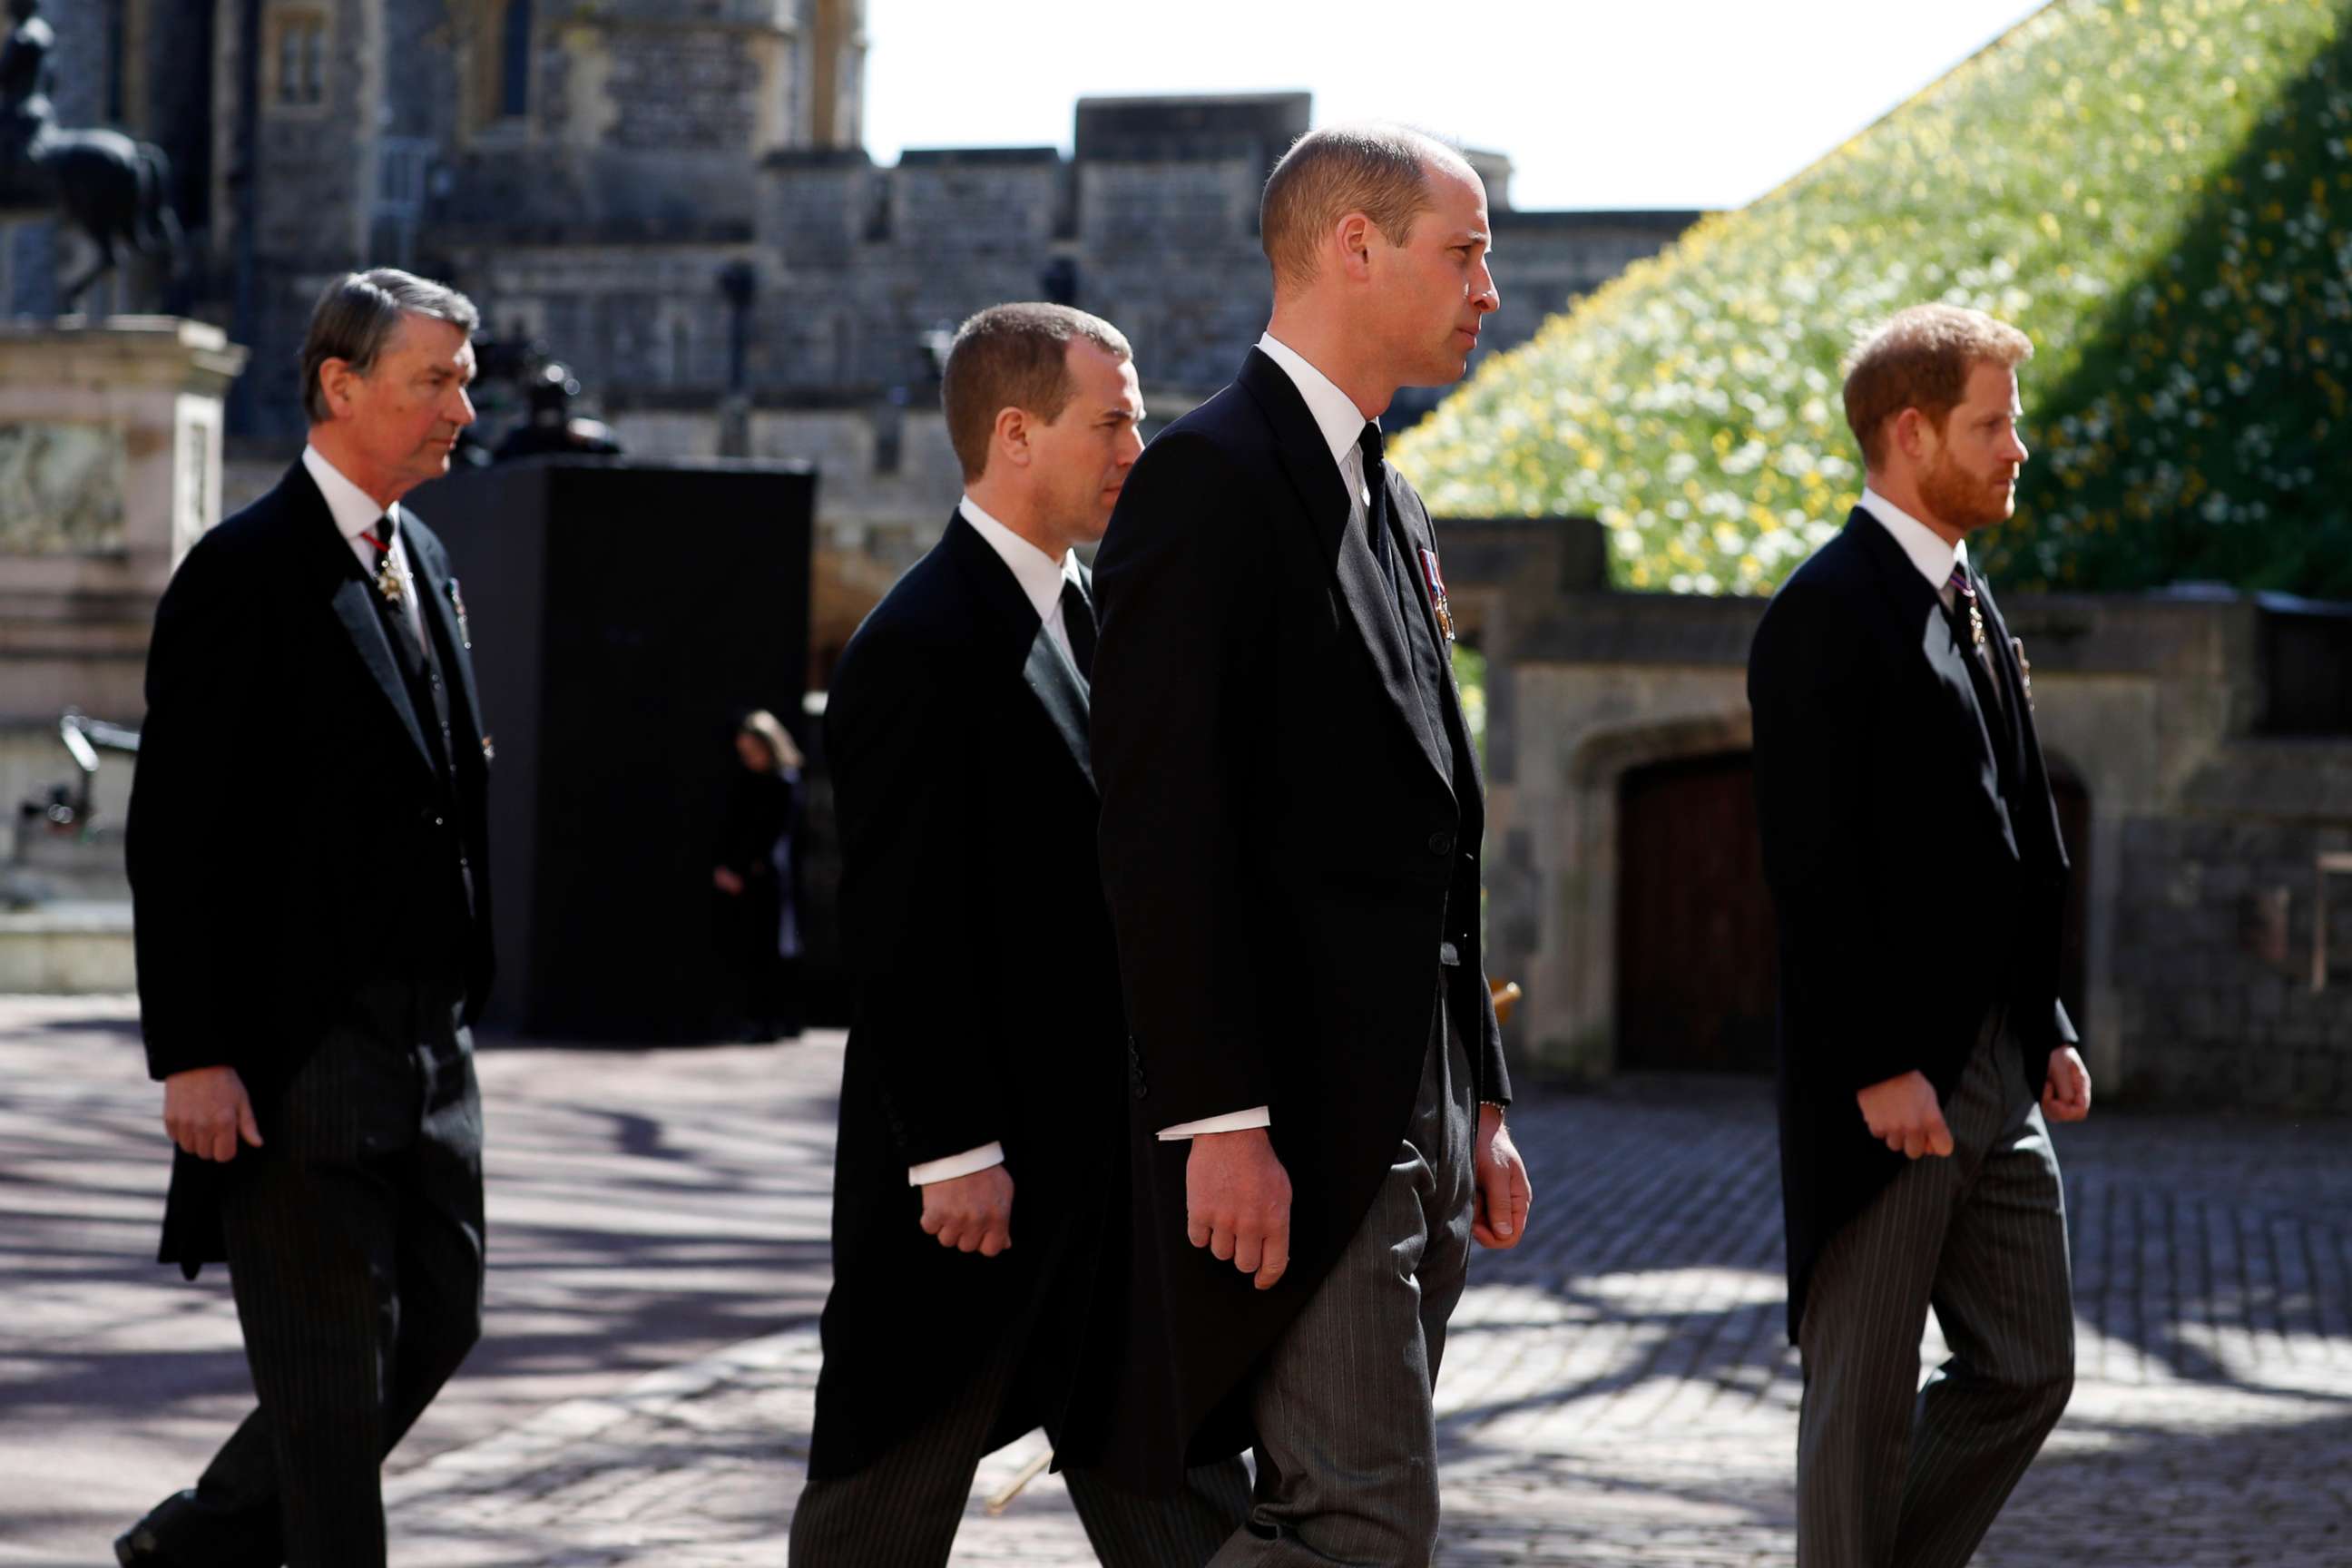 PHOTO: Vice-Admiral Sir Timothy Laurence, Peter Phillips, Prince William, Duke of Cambridge and Prince Harry, Duke of Sussex walk during the Ceremonial Procession at Windsor Castle on April 17, 2021, in Windsor, England.